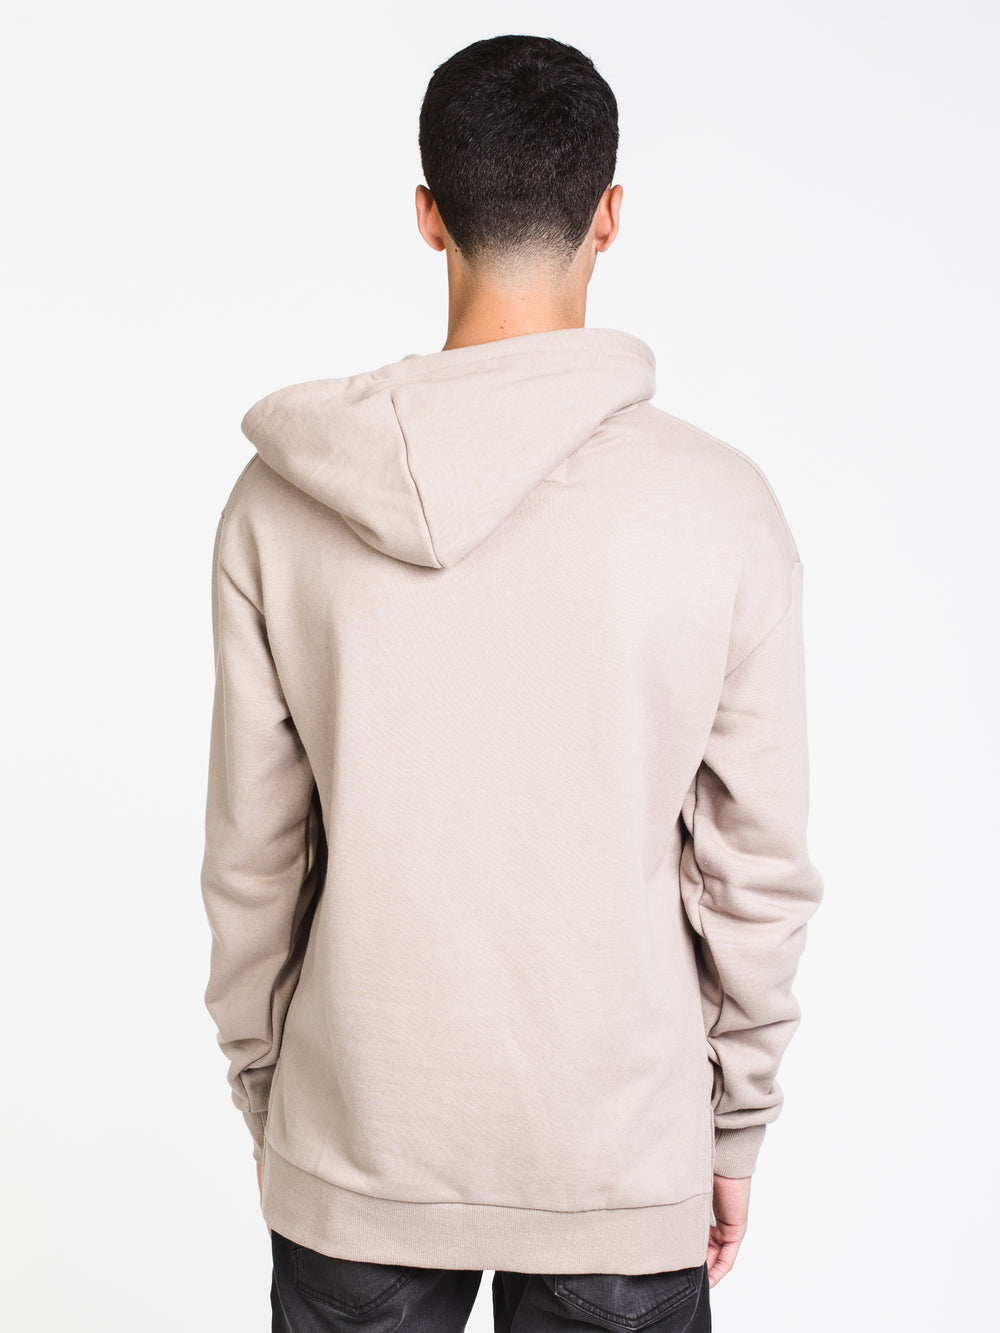 MENS PROJECT ZANEROBE PULLOVER HOODIE- TIMBER - CLEARANCE